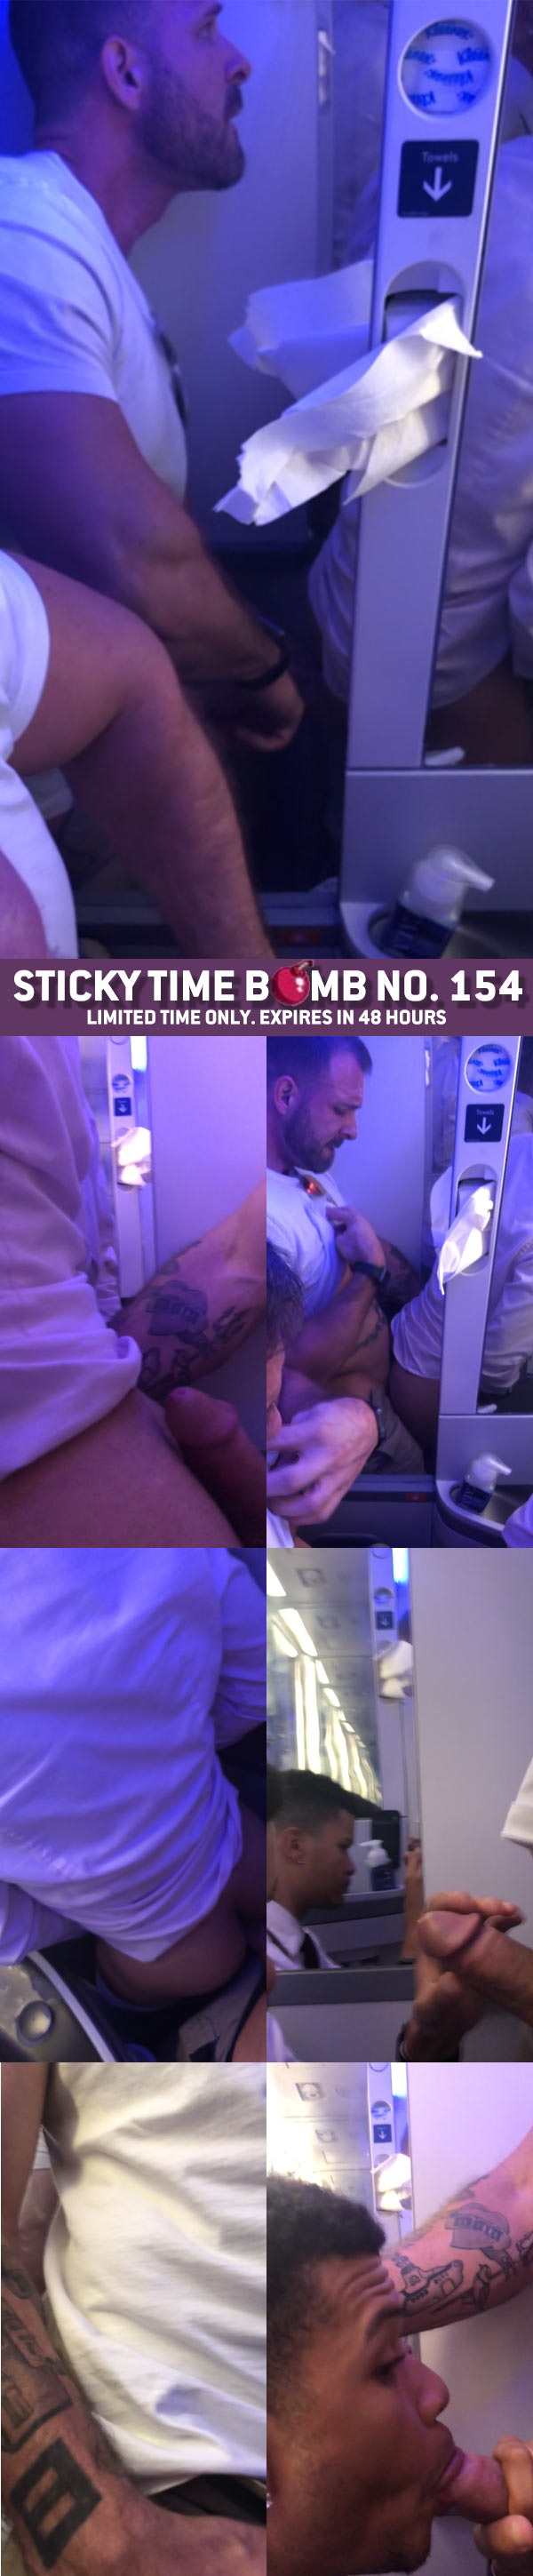 UPDATED) Austin Wolf and The Delta Airlines Aircraft Hook-Up Video -  QueerClick